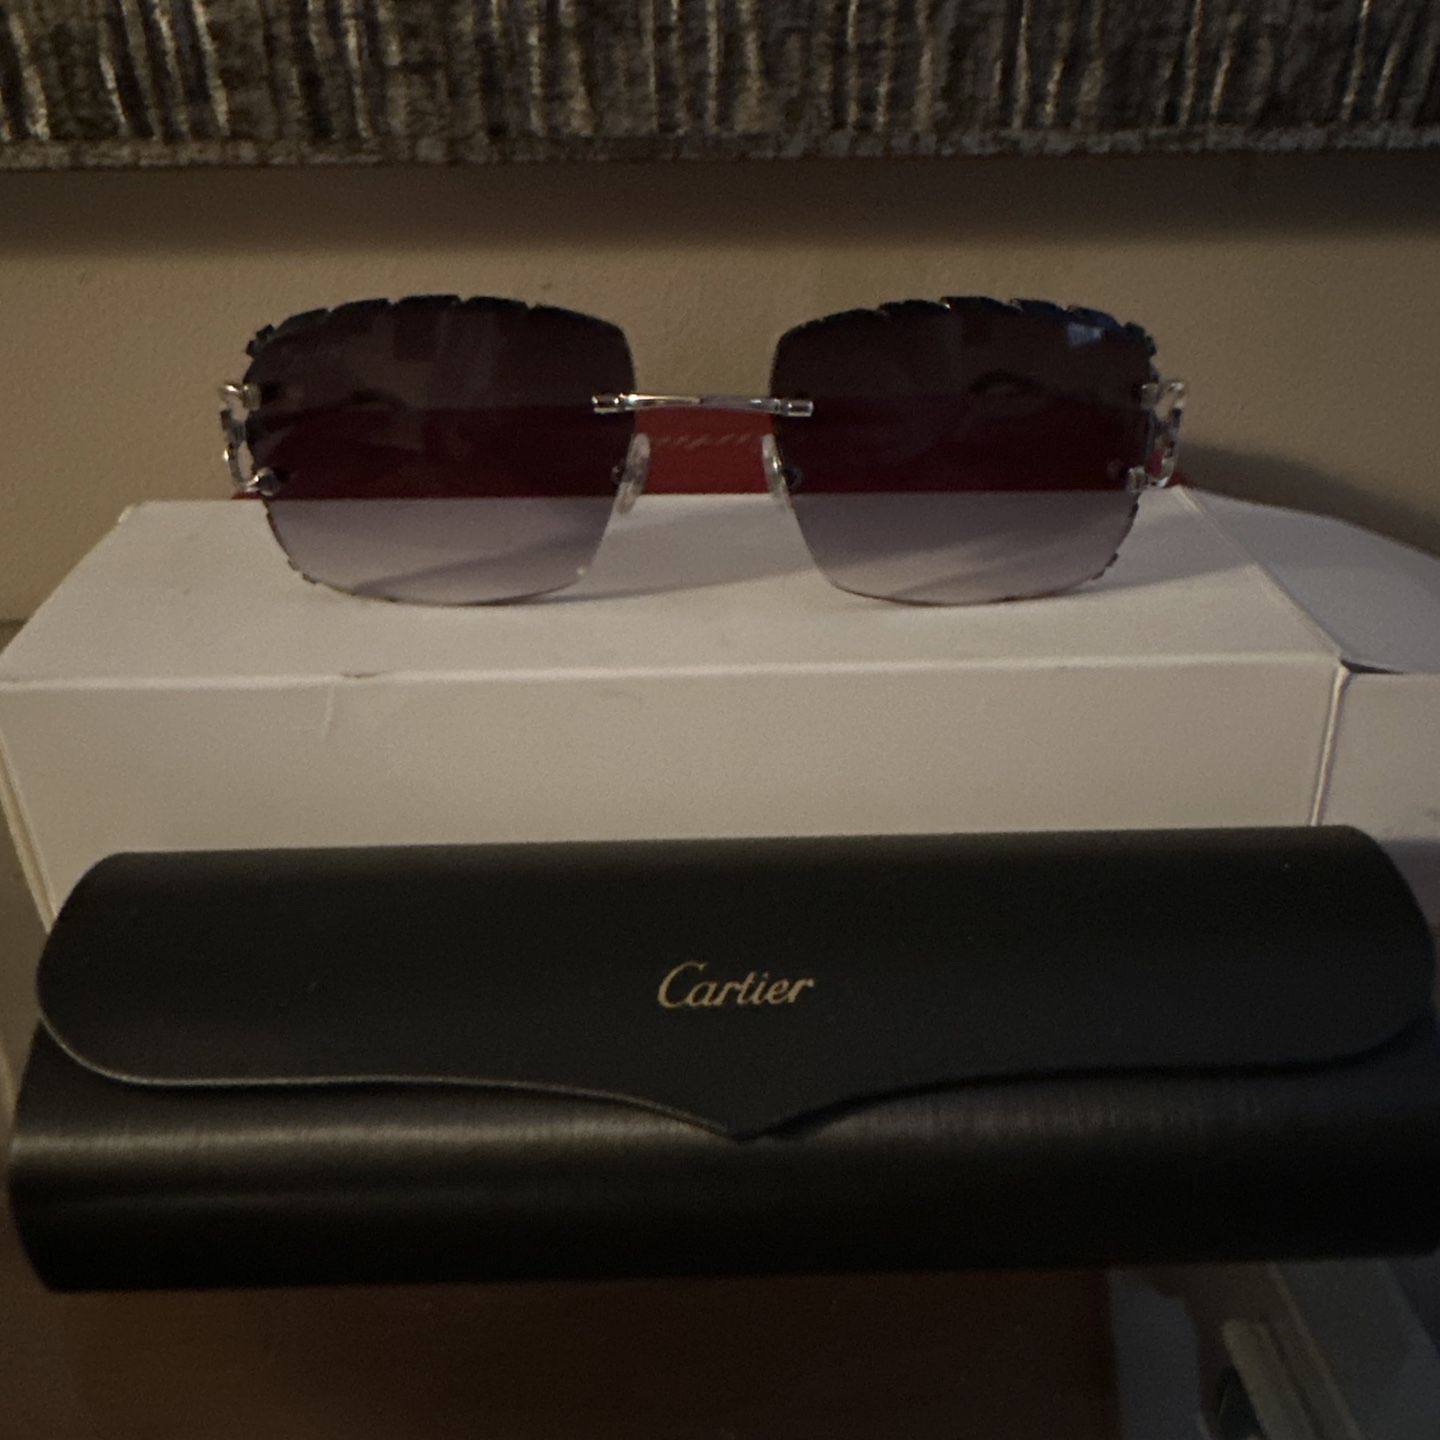 Cartier Grey/Black Lens Diamond Cut Big C Glasses with Platinum Detail for  Sale in The Bronx, NY - OfferUp